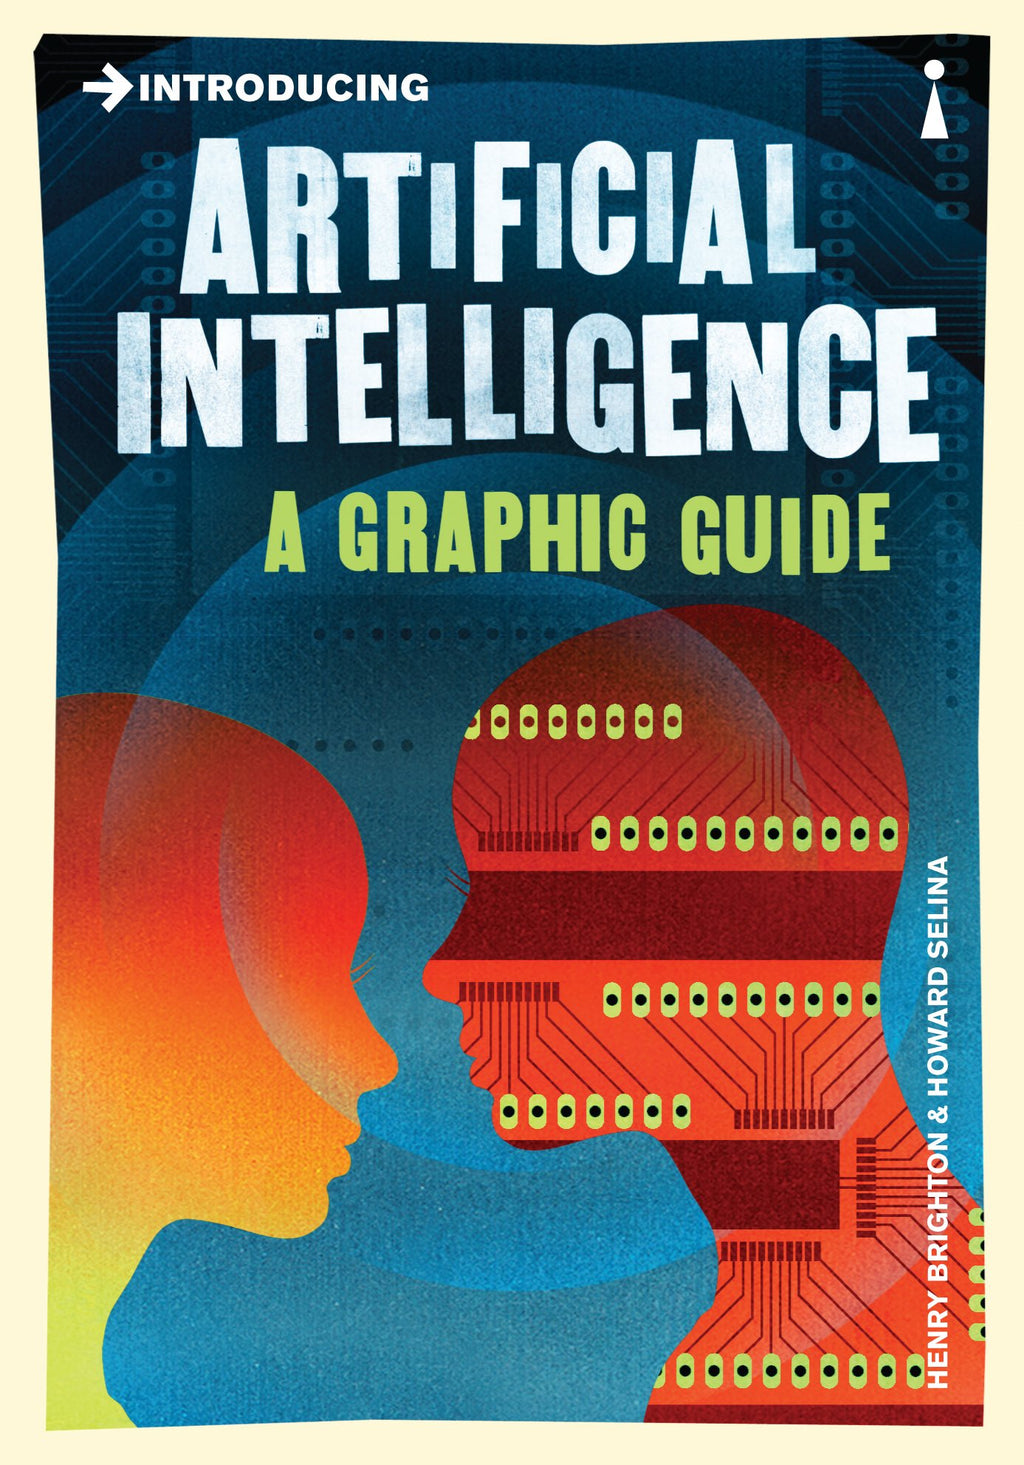 Introducing Artificial Intelligence: A Graphic Guide, by Henry Brighton, Illustrated by Howard Selina